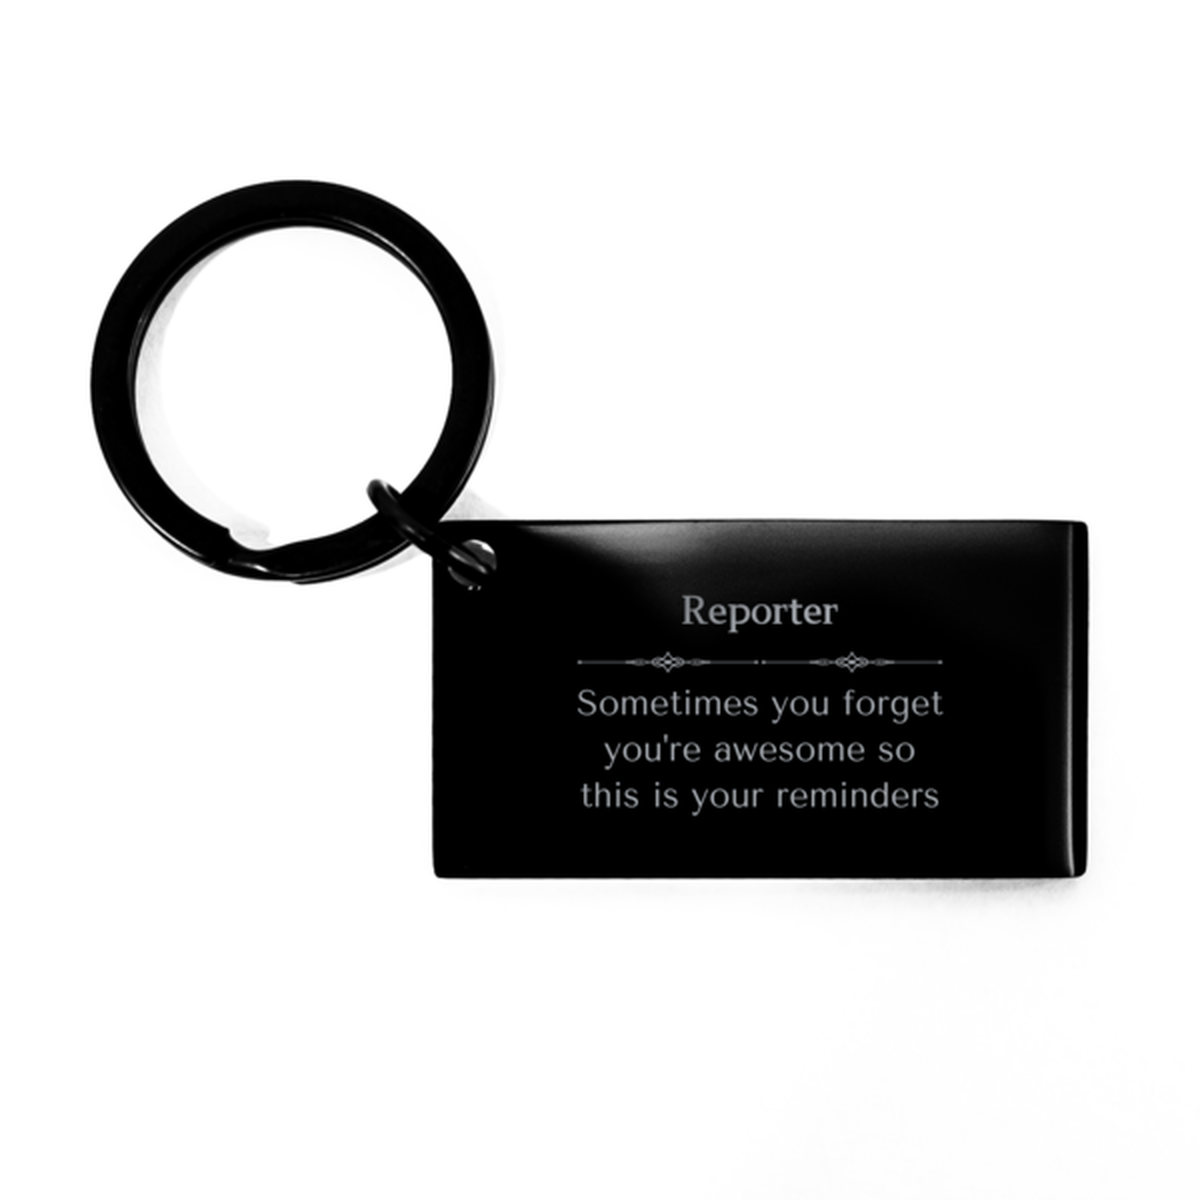 Sentimental Reporter Keychain, Telephone Operator Sometimes you forget you're awesome so this is your reminders, Graduation Christmas Birthday Gifts for Reporter, Men, Women, Coworkers